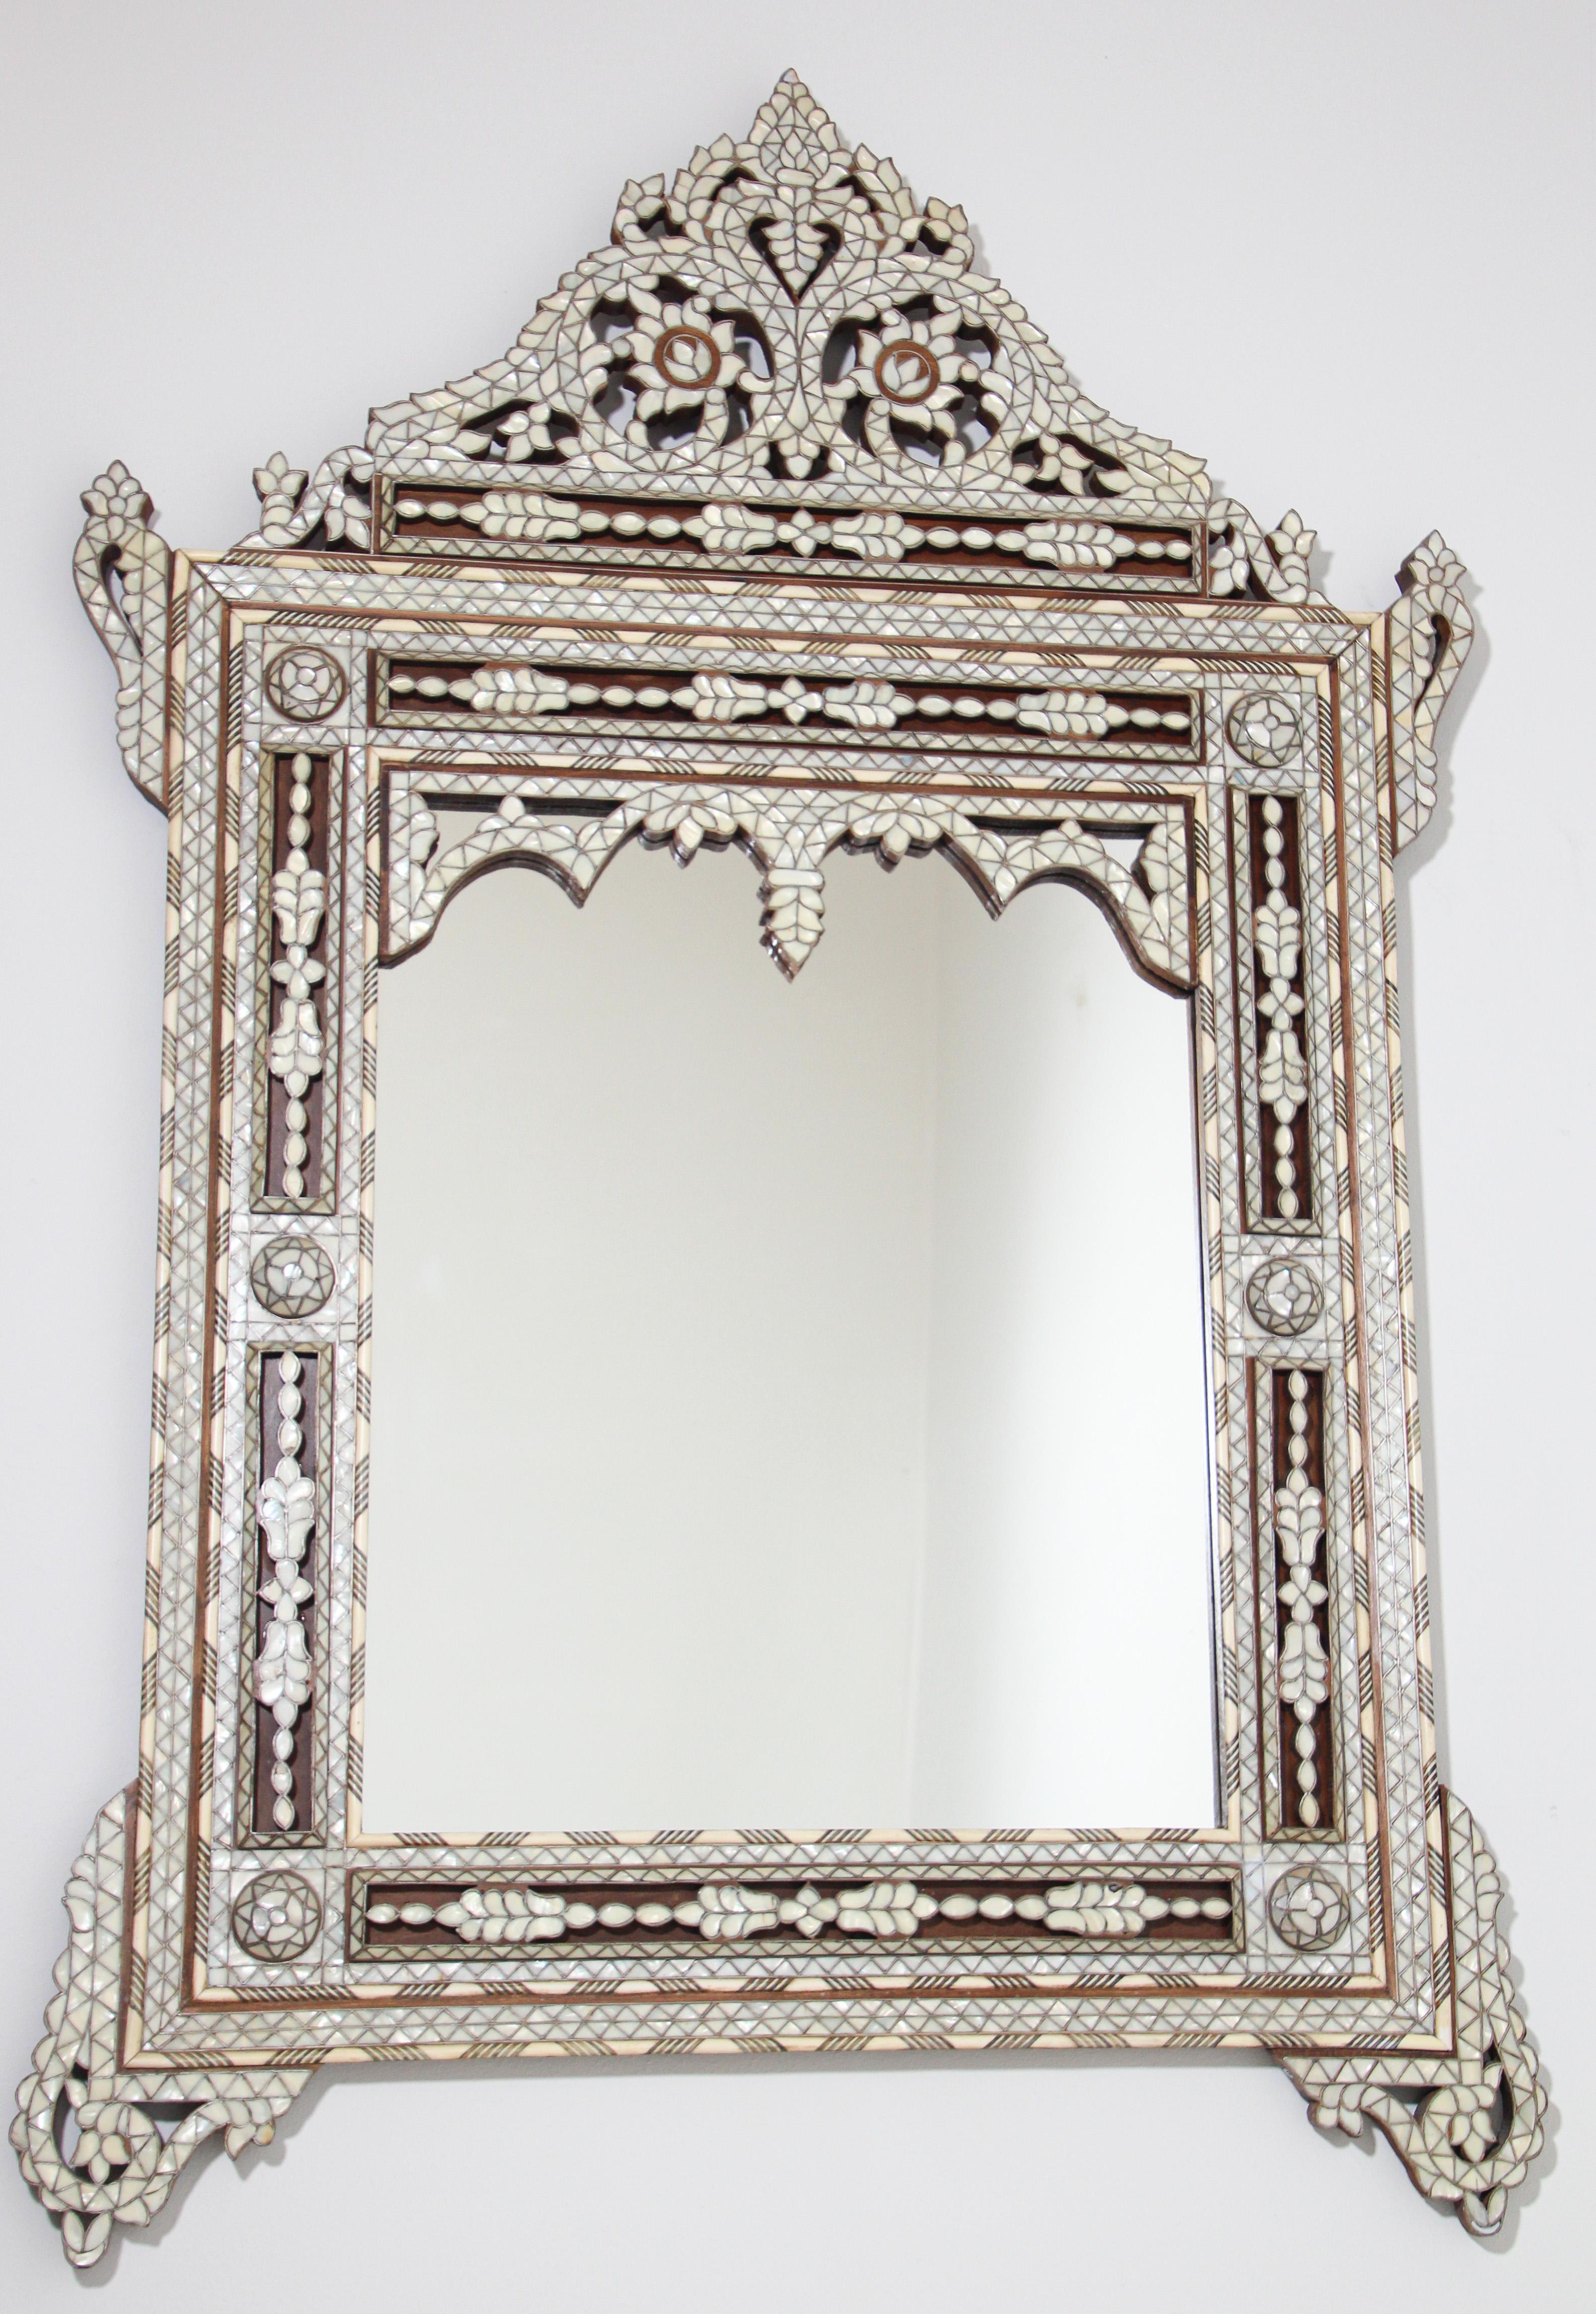 Lebanese Middle Eastern Moorish white mother of pearl inlaid mirror.
Antique Middle Eastern Moorish mirror in the Lebanese, Syrian style.
Sensational large Levantine finely inlaid with mother of pearl, each piece of mother of pearl is out lined